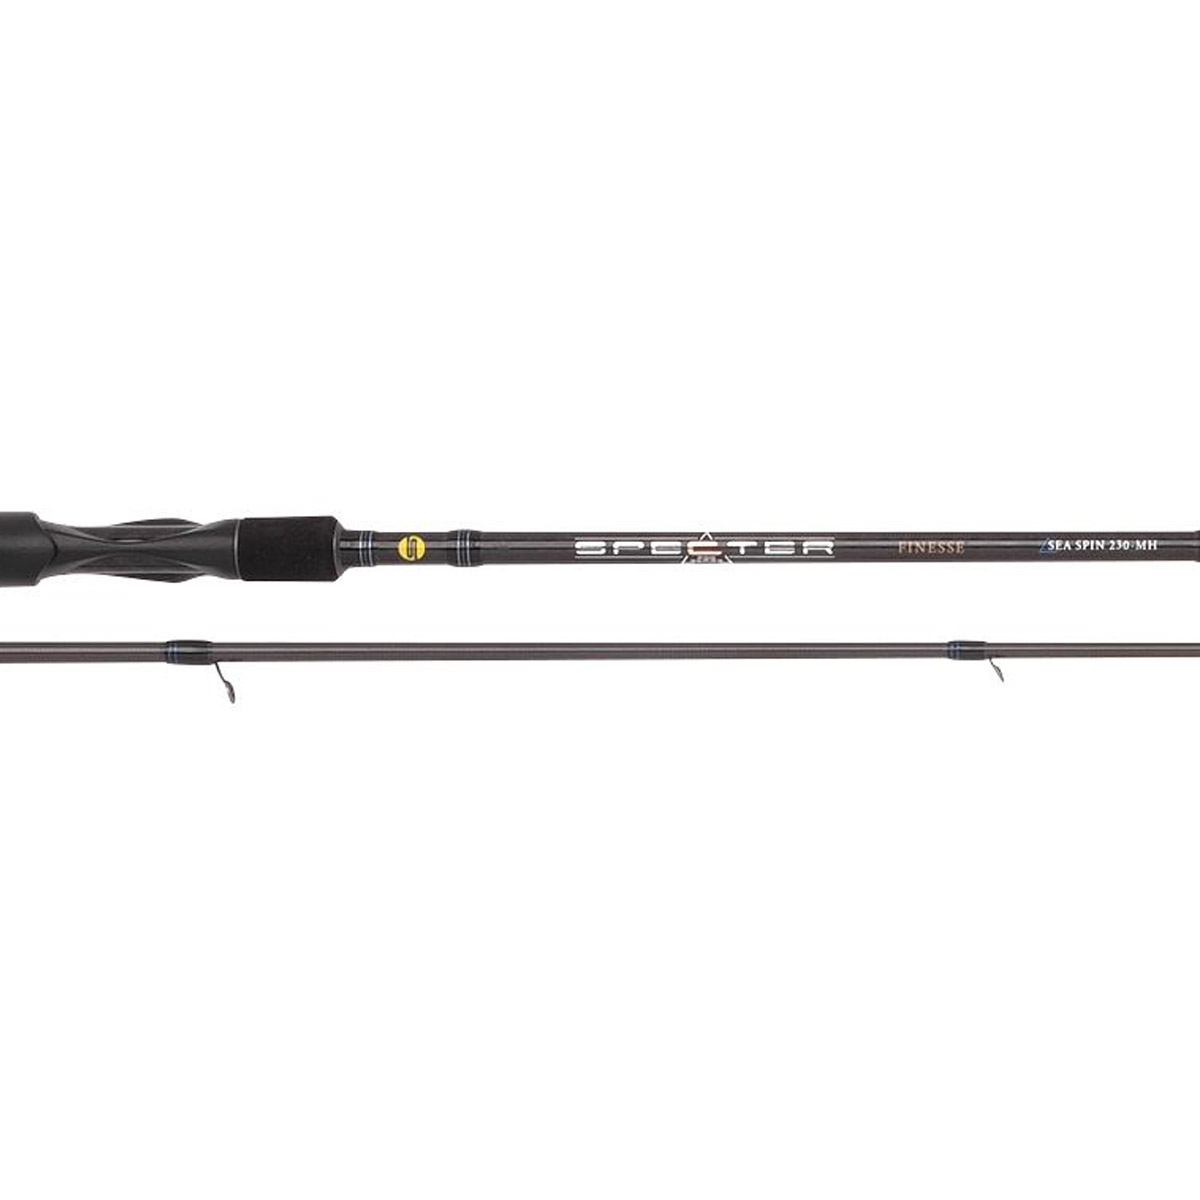 Spro Specter Finesse Sea Spin 2,70M MH 9-50 Gram